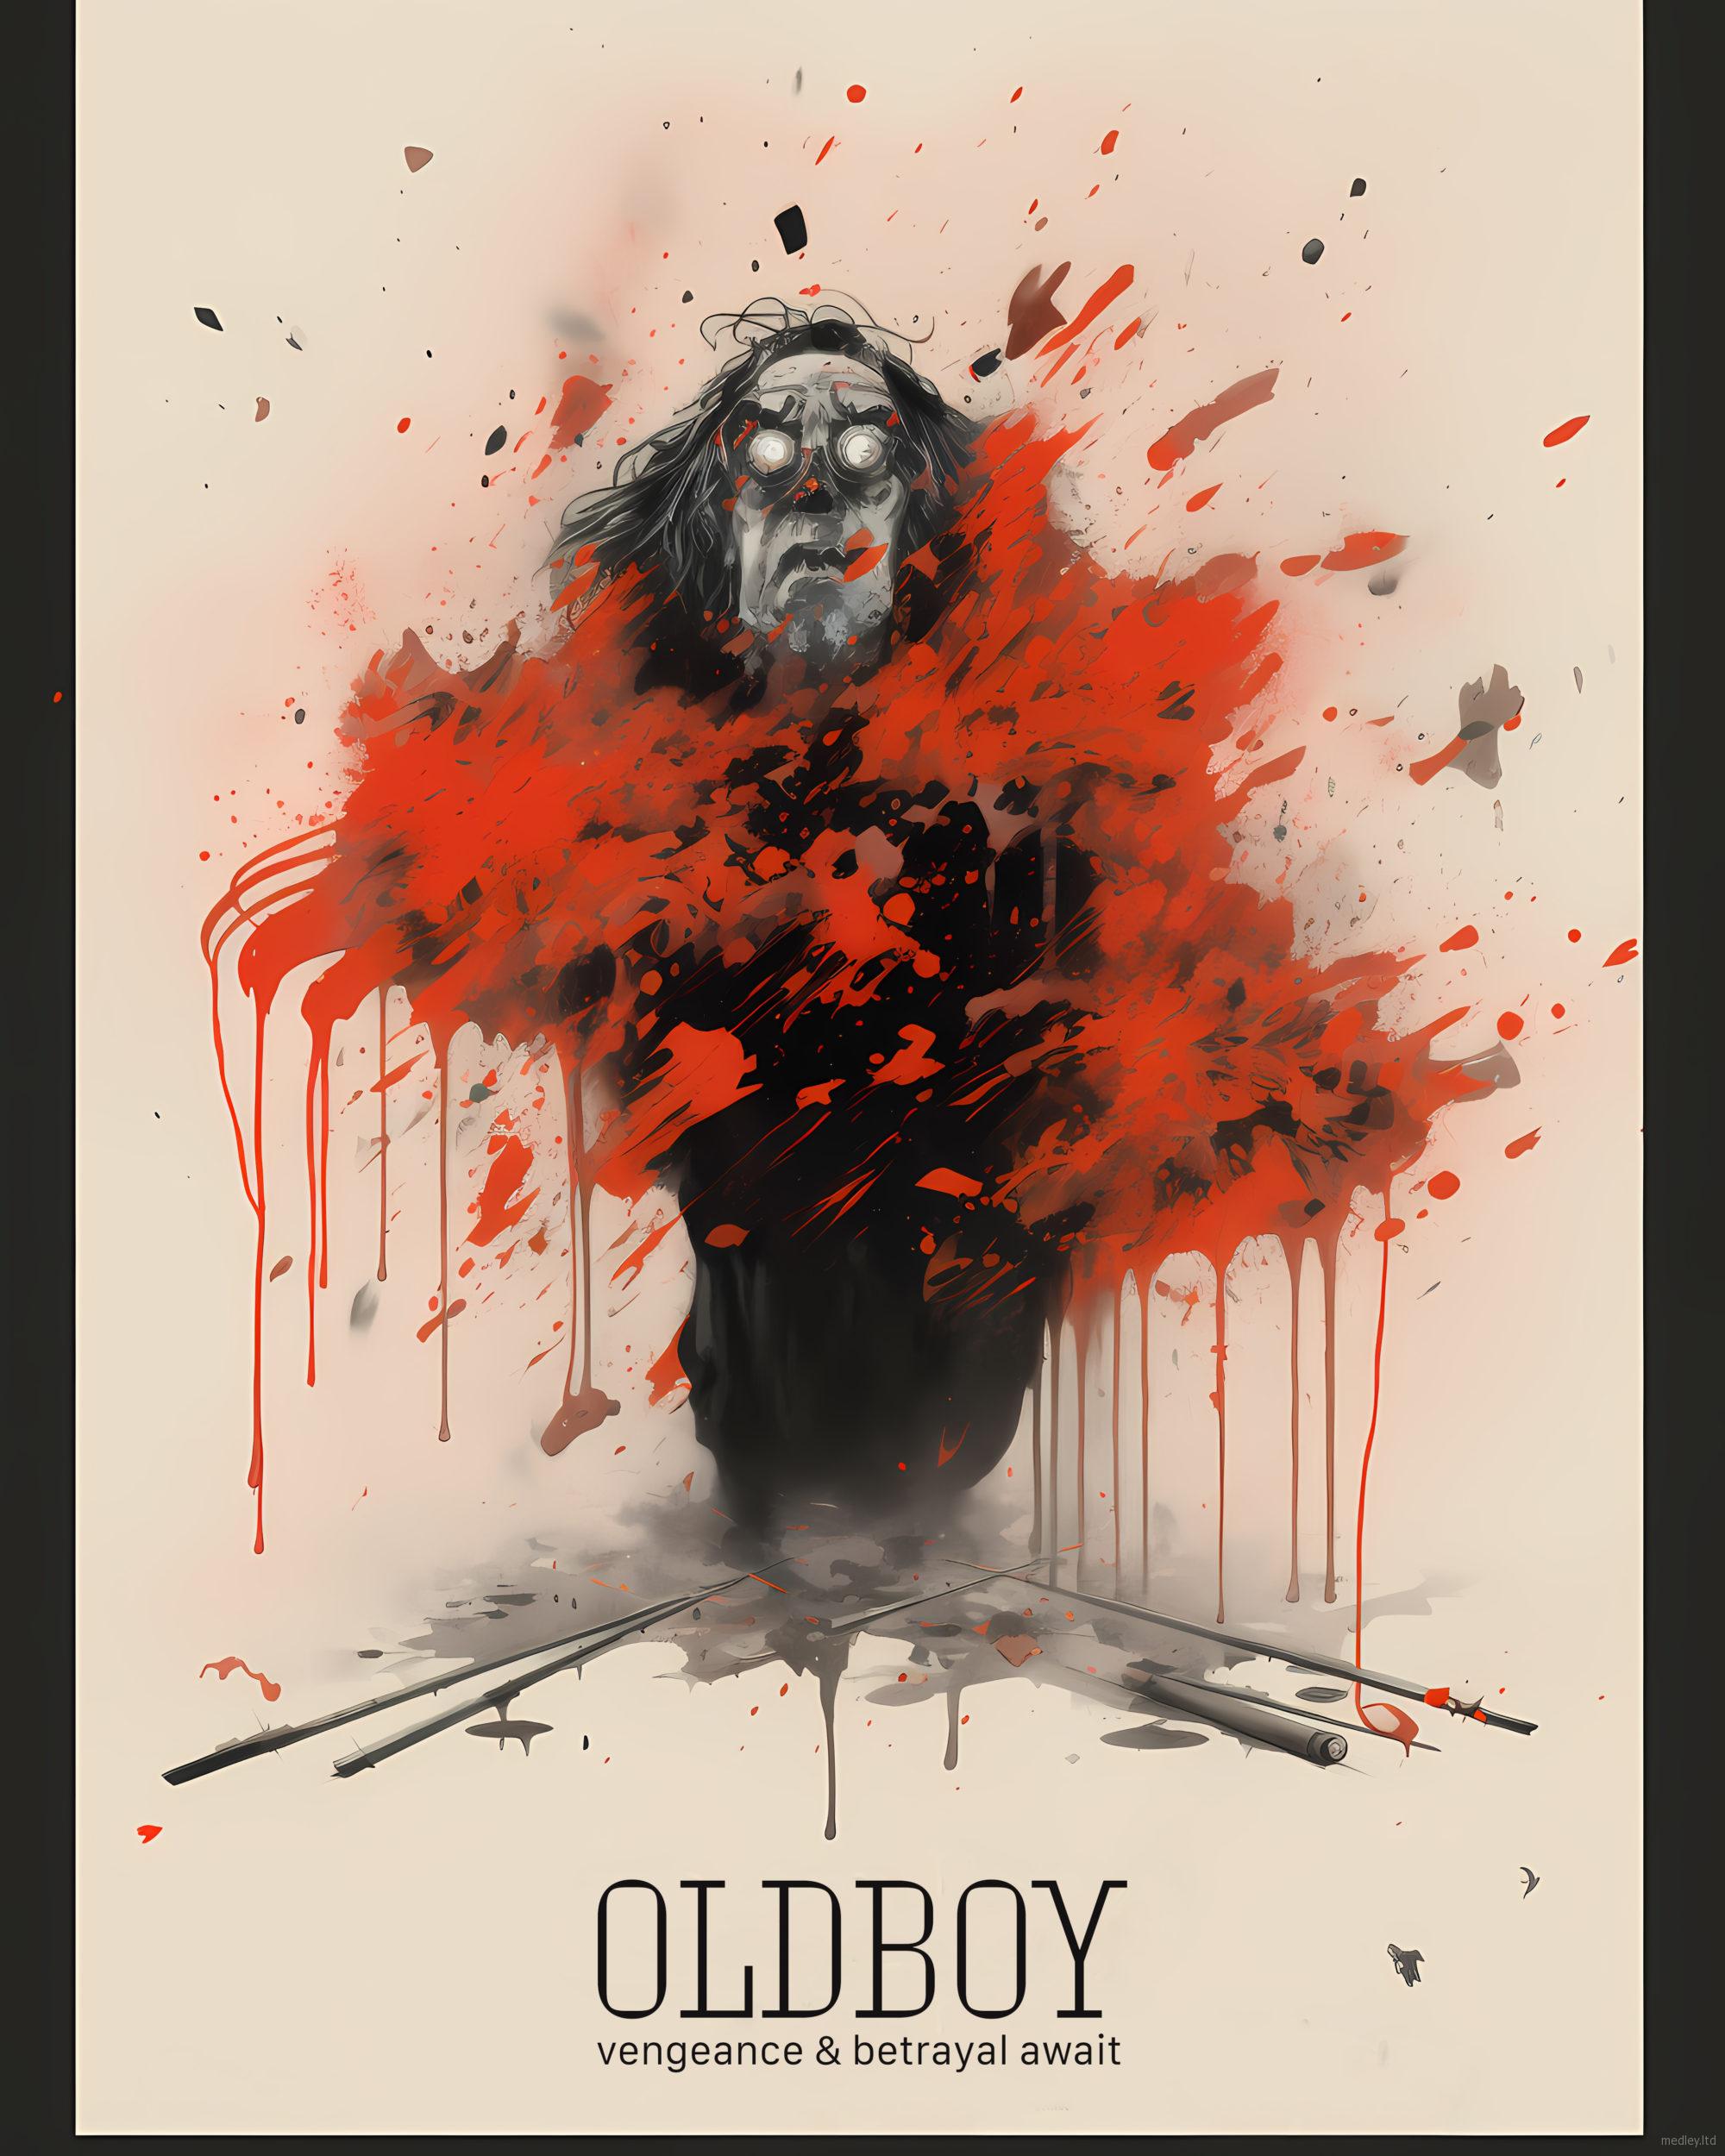 Enter the savage world of Oldboy - vengeance and betrayal await.